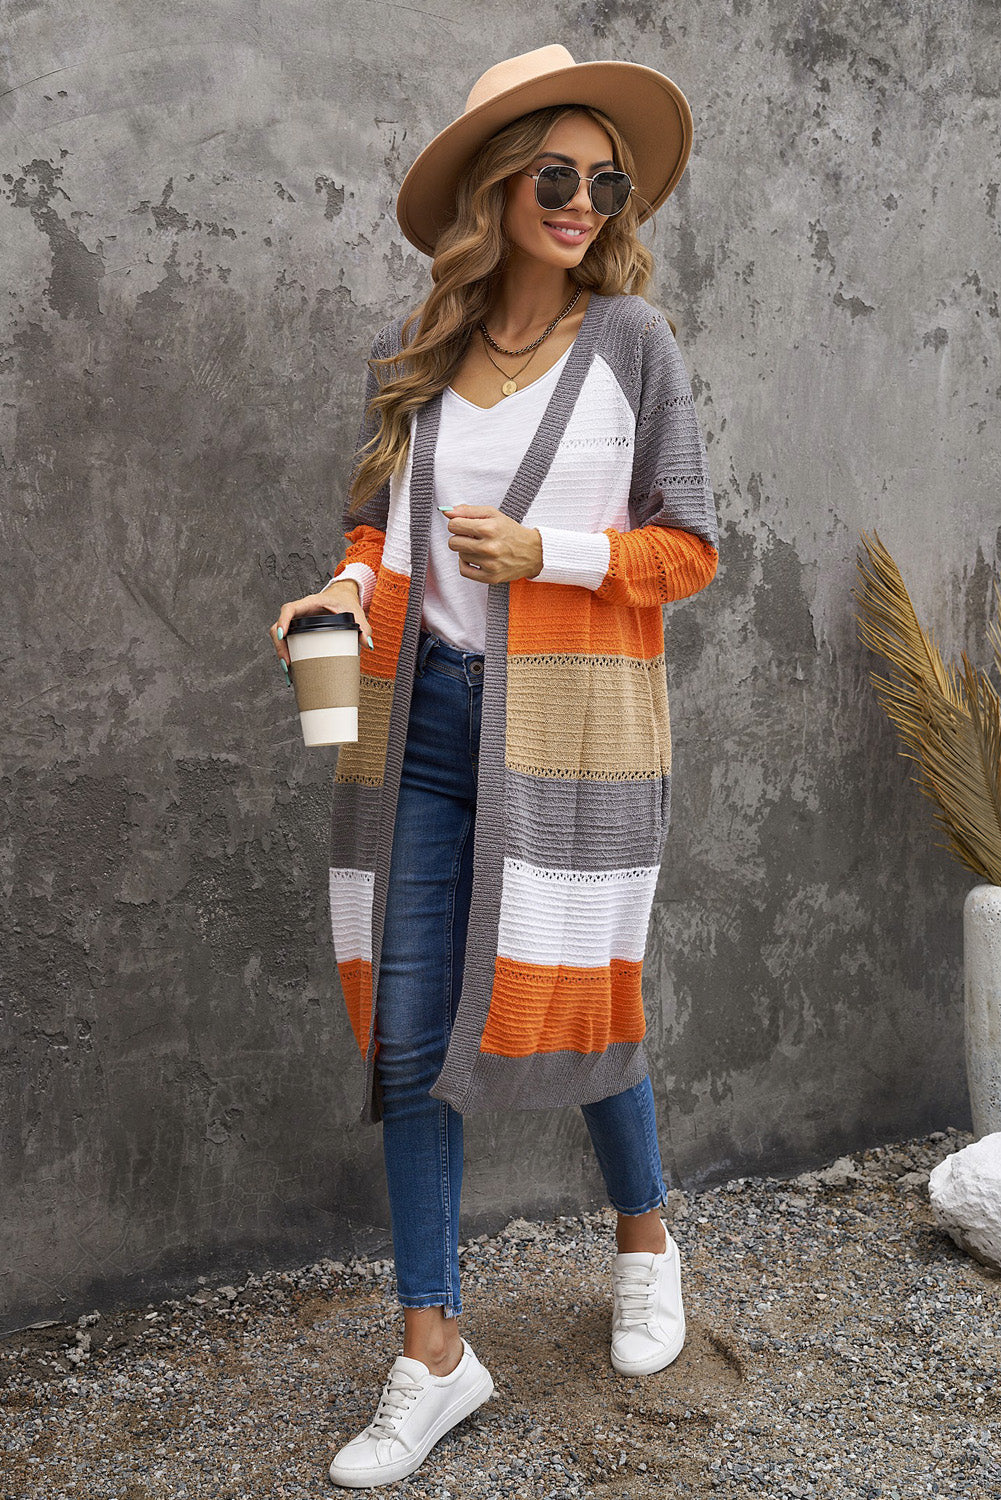 Gray Color Block Eyelet Knitted Lightweight Long Cardigan